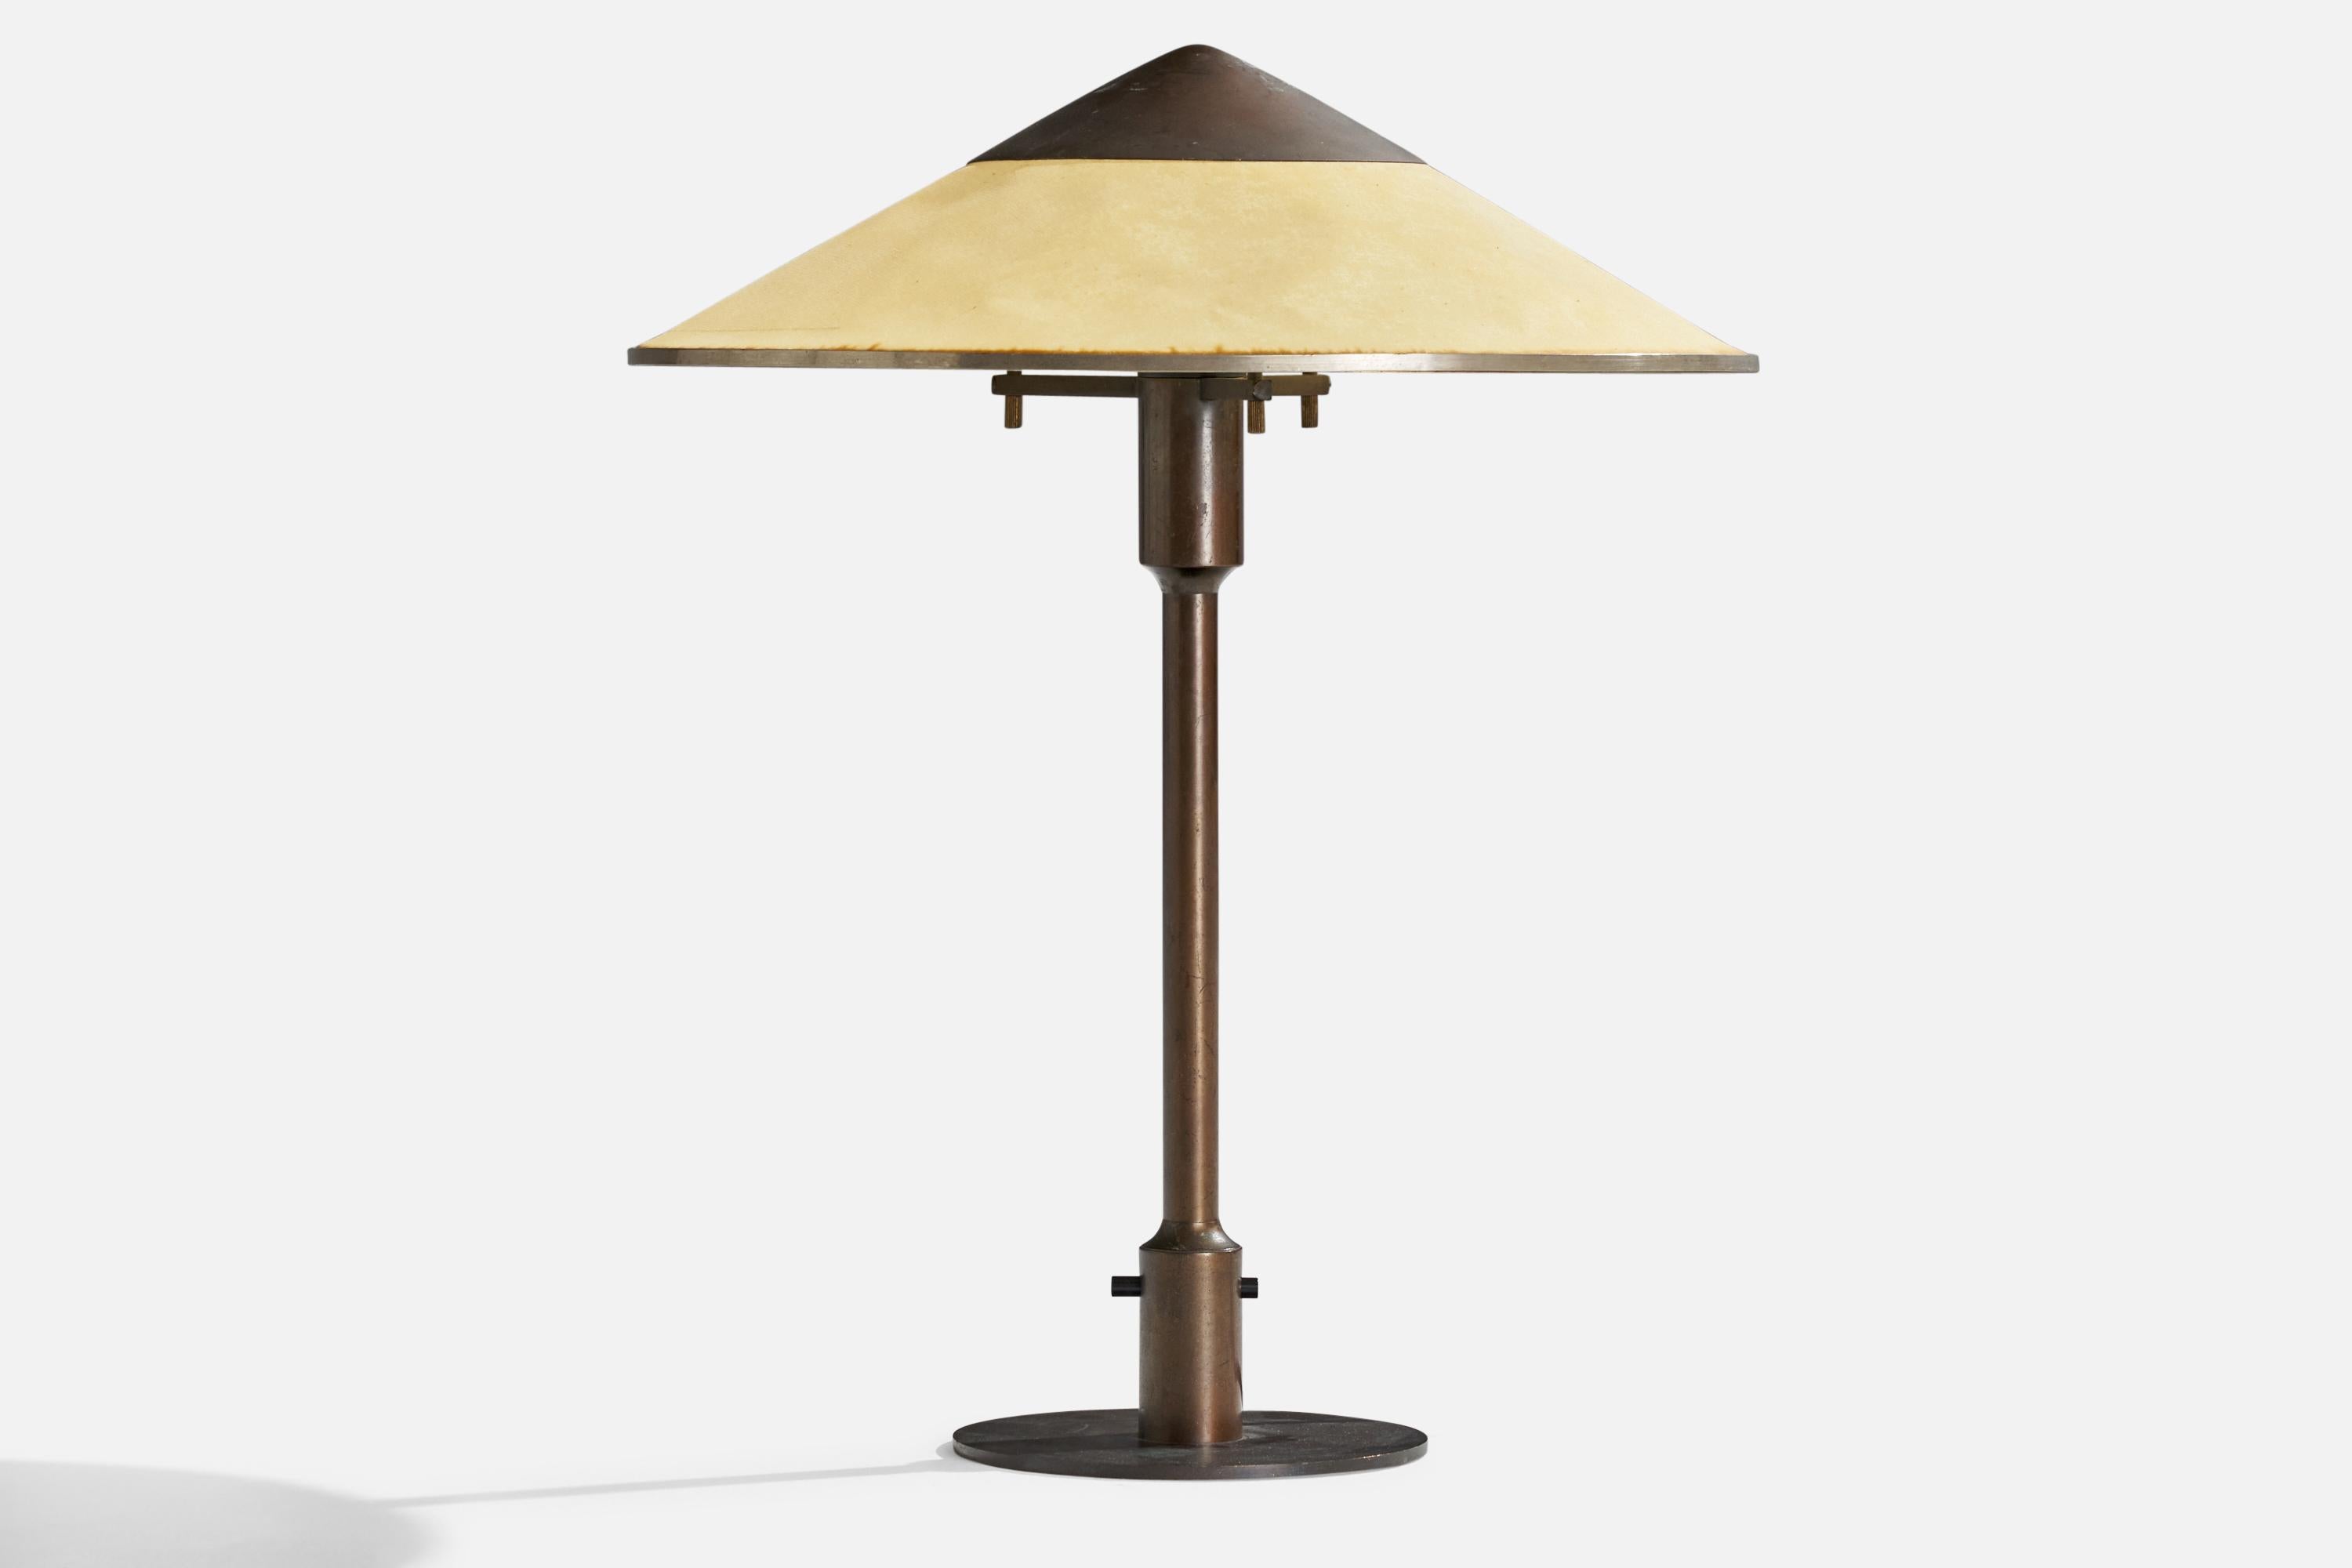 A copper and light yellow waxed paper table lamp designed and produced by Niels Rasmussen Thykier, Denmark, 1930s.

Overall Dimensions (inches): 19” H x 14.75” diameter

Bulb Specifications: E-26 Bulb
Number of Sockets: 1
All lighting will be